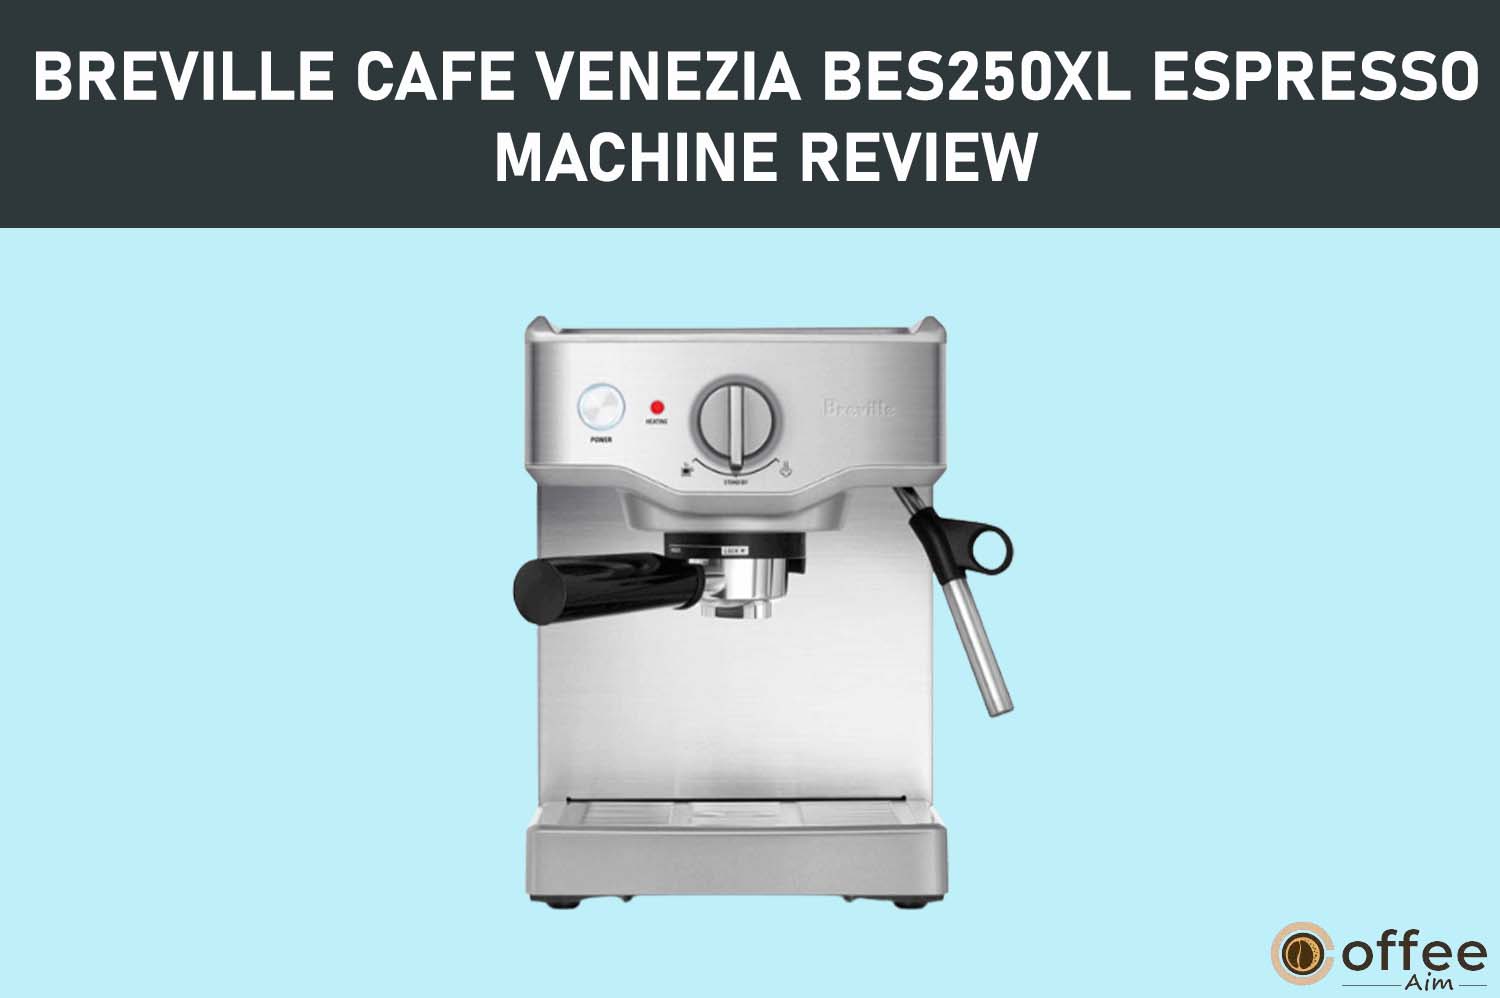 Featured image for the article "Breville Cafe Venezia BES250XL Espresso Machine Review"